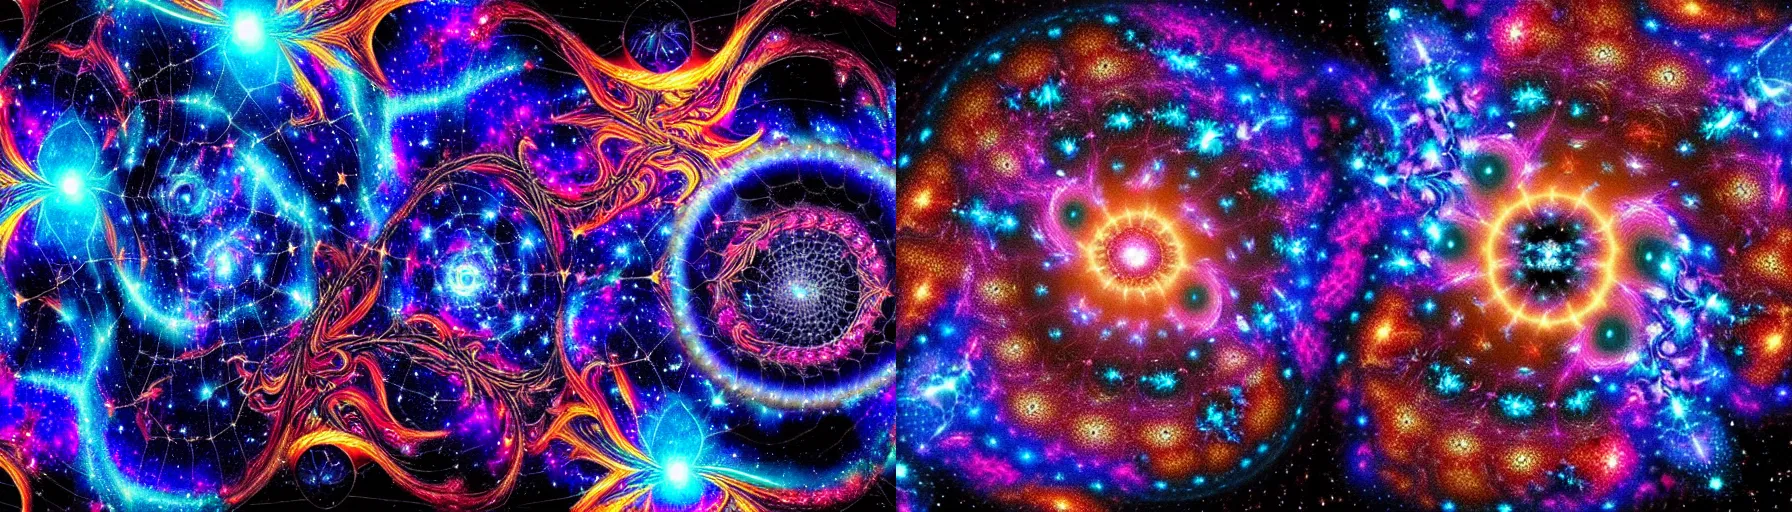 Prompt: a galaxy exploding, psychedelic colors, a blacksmith swinging his hammer at his forge, realistic reflections, body building blacksmith, stars, psychedelic patterns, fractal, rippling fabric of reality, the spider that weaves the web of time